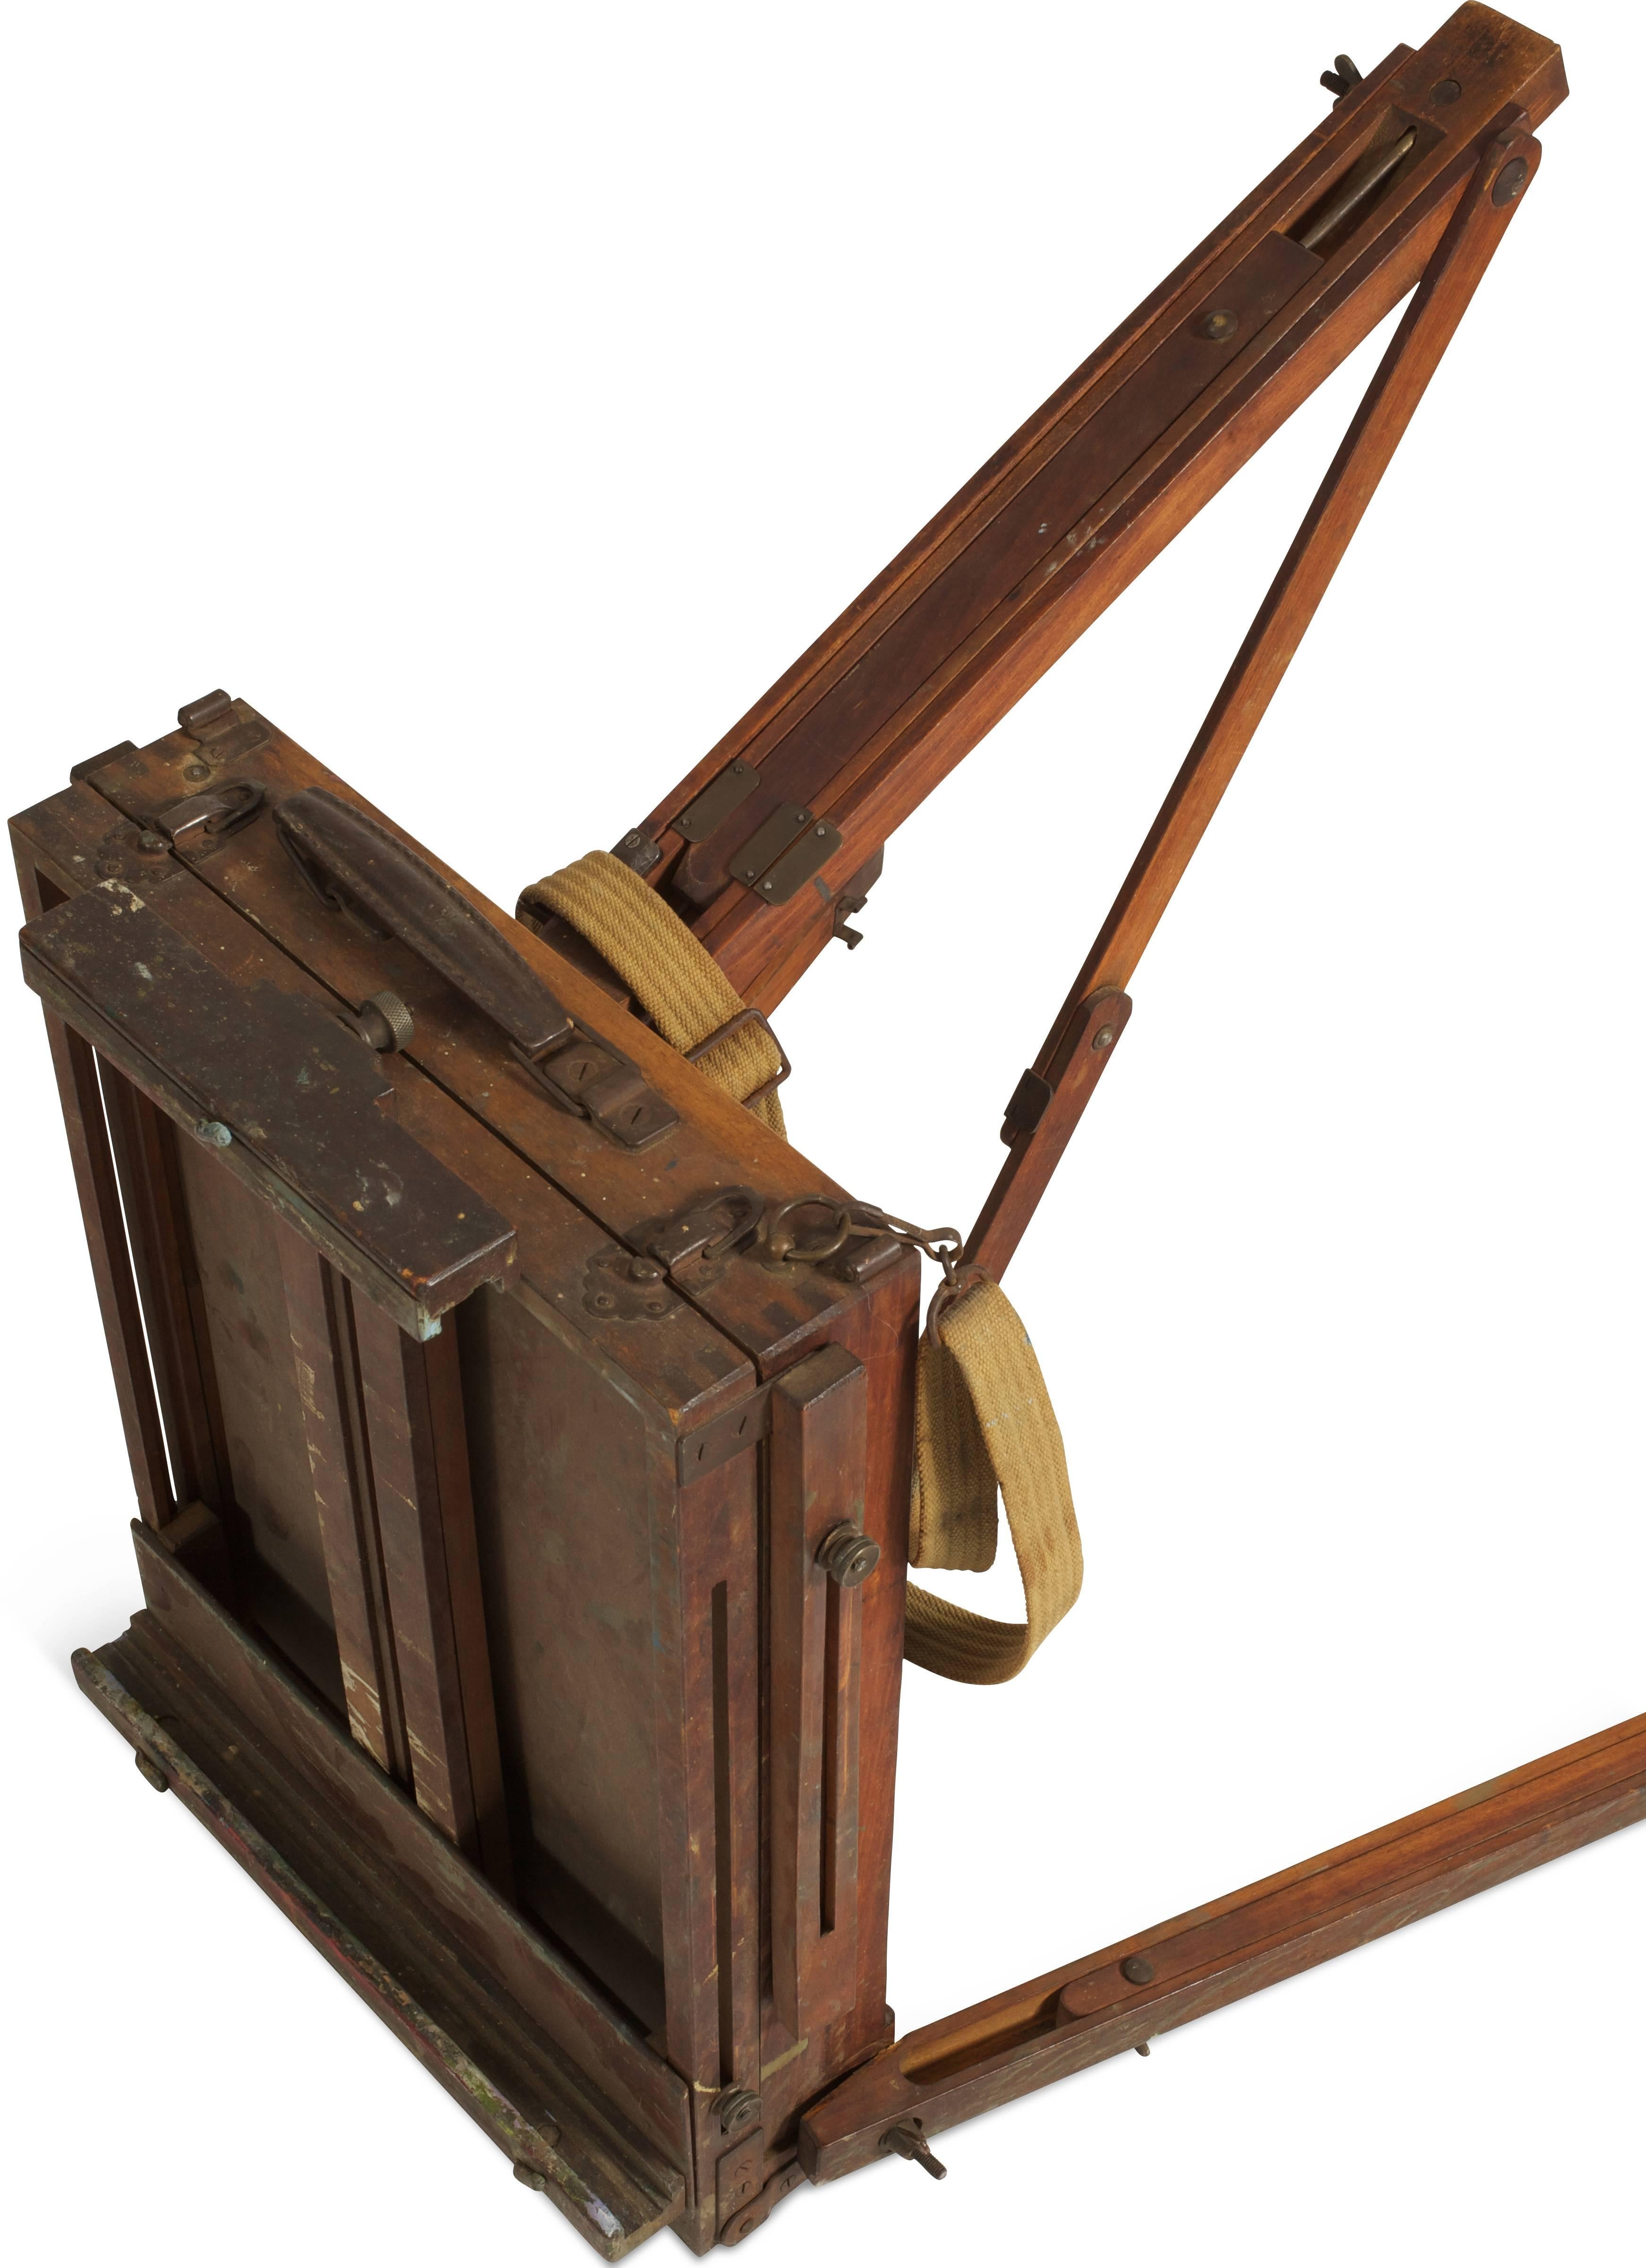 Ingenious construction gives this portable painter's easel and carrying case three folding and adjustable legs to stand on for either standing or sitting heights, a drawer for supplies (presently filled with used paint tubes, brushes, charcoal,